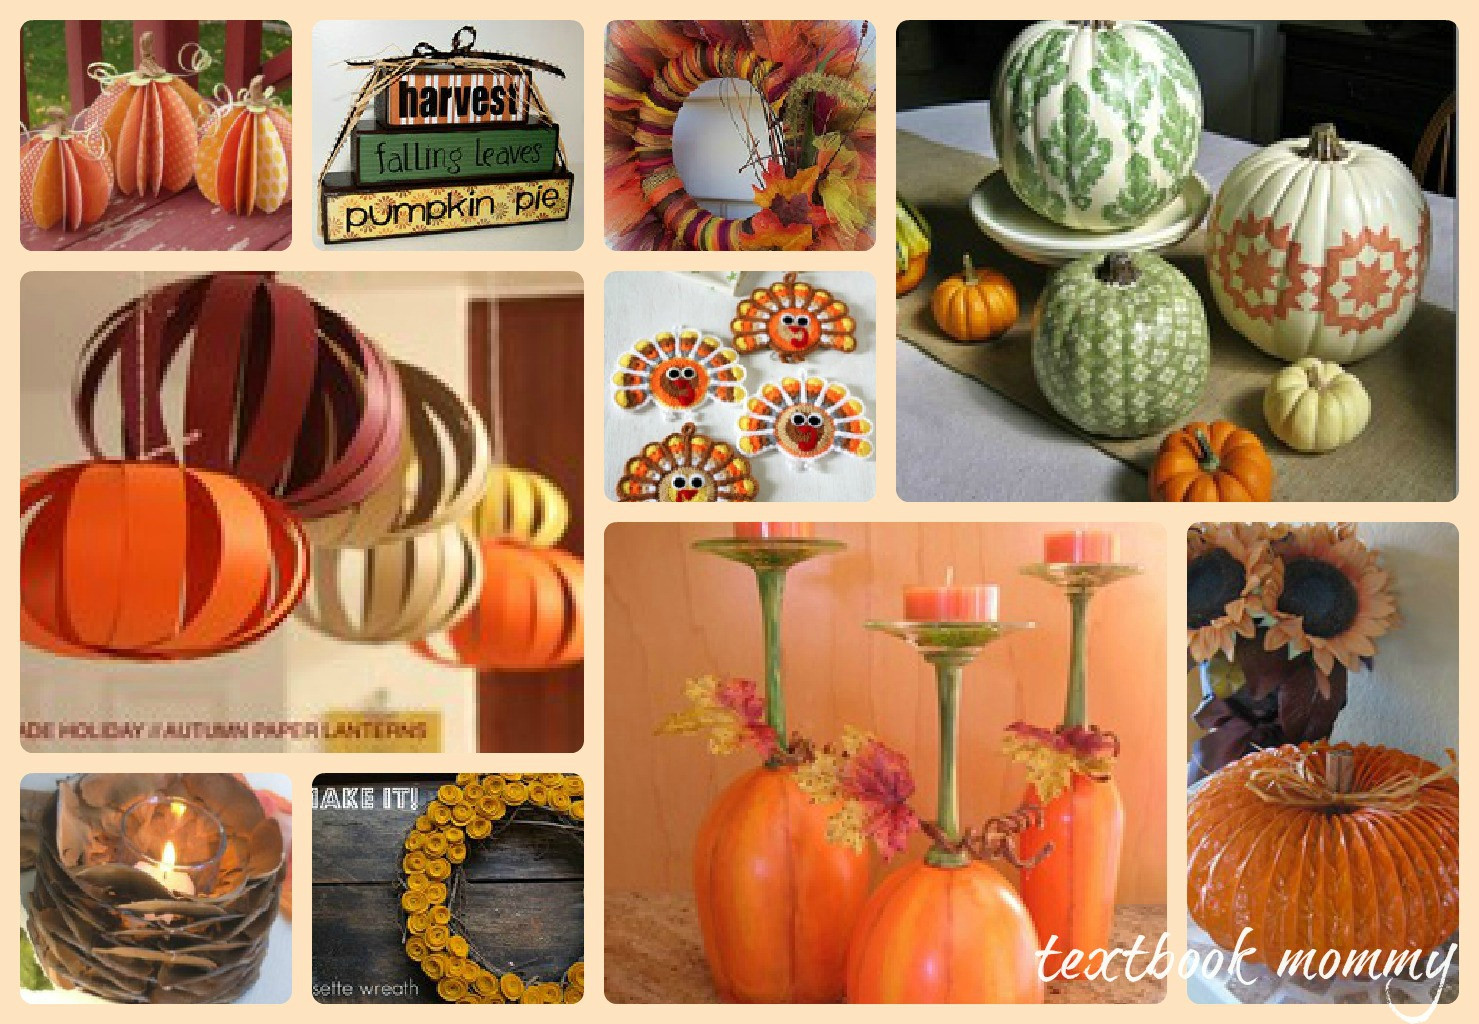 Thanksgiving Home Decor
 Textbook Mommy 10 Fantastic Thanksgiving Home Decor Crafts